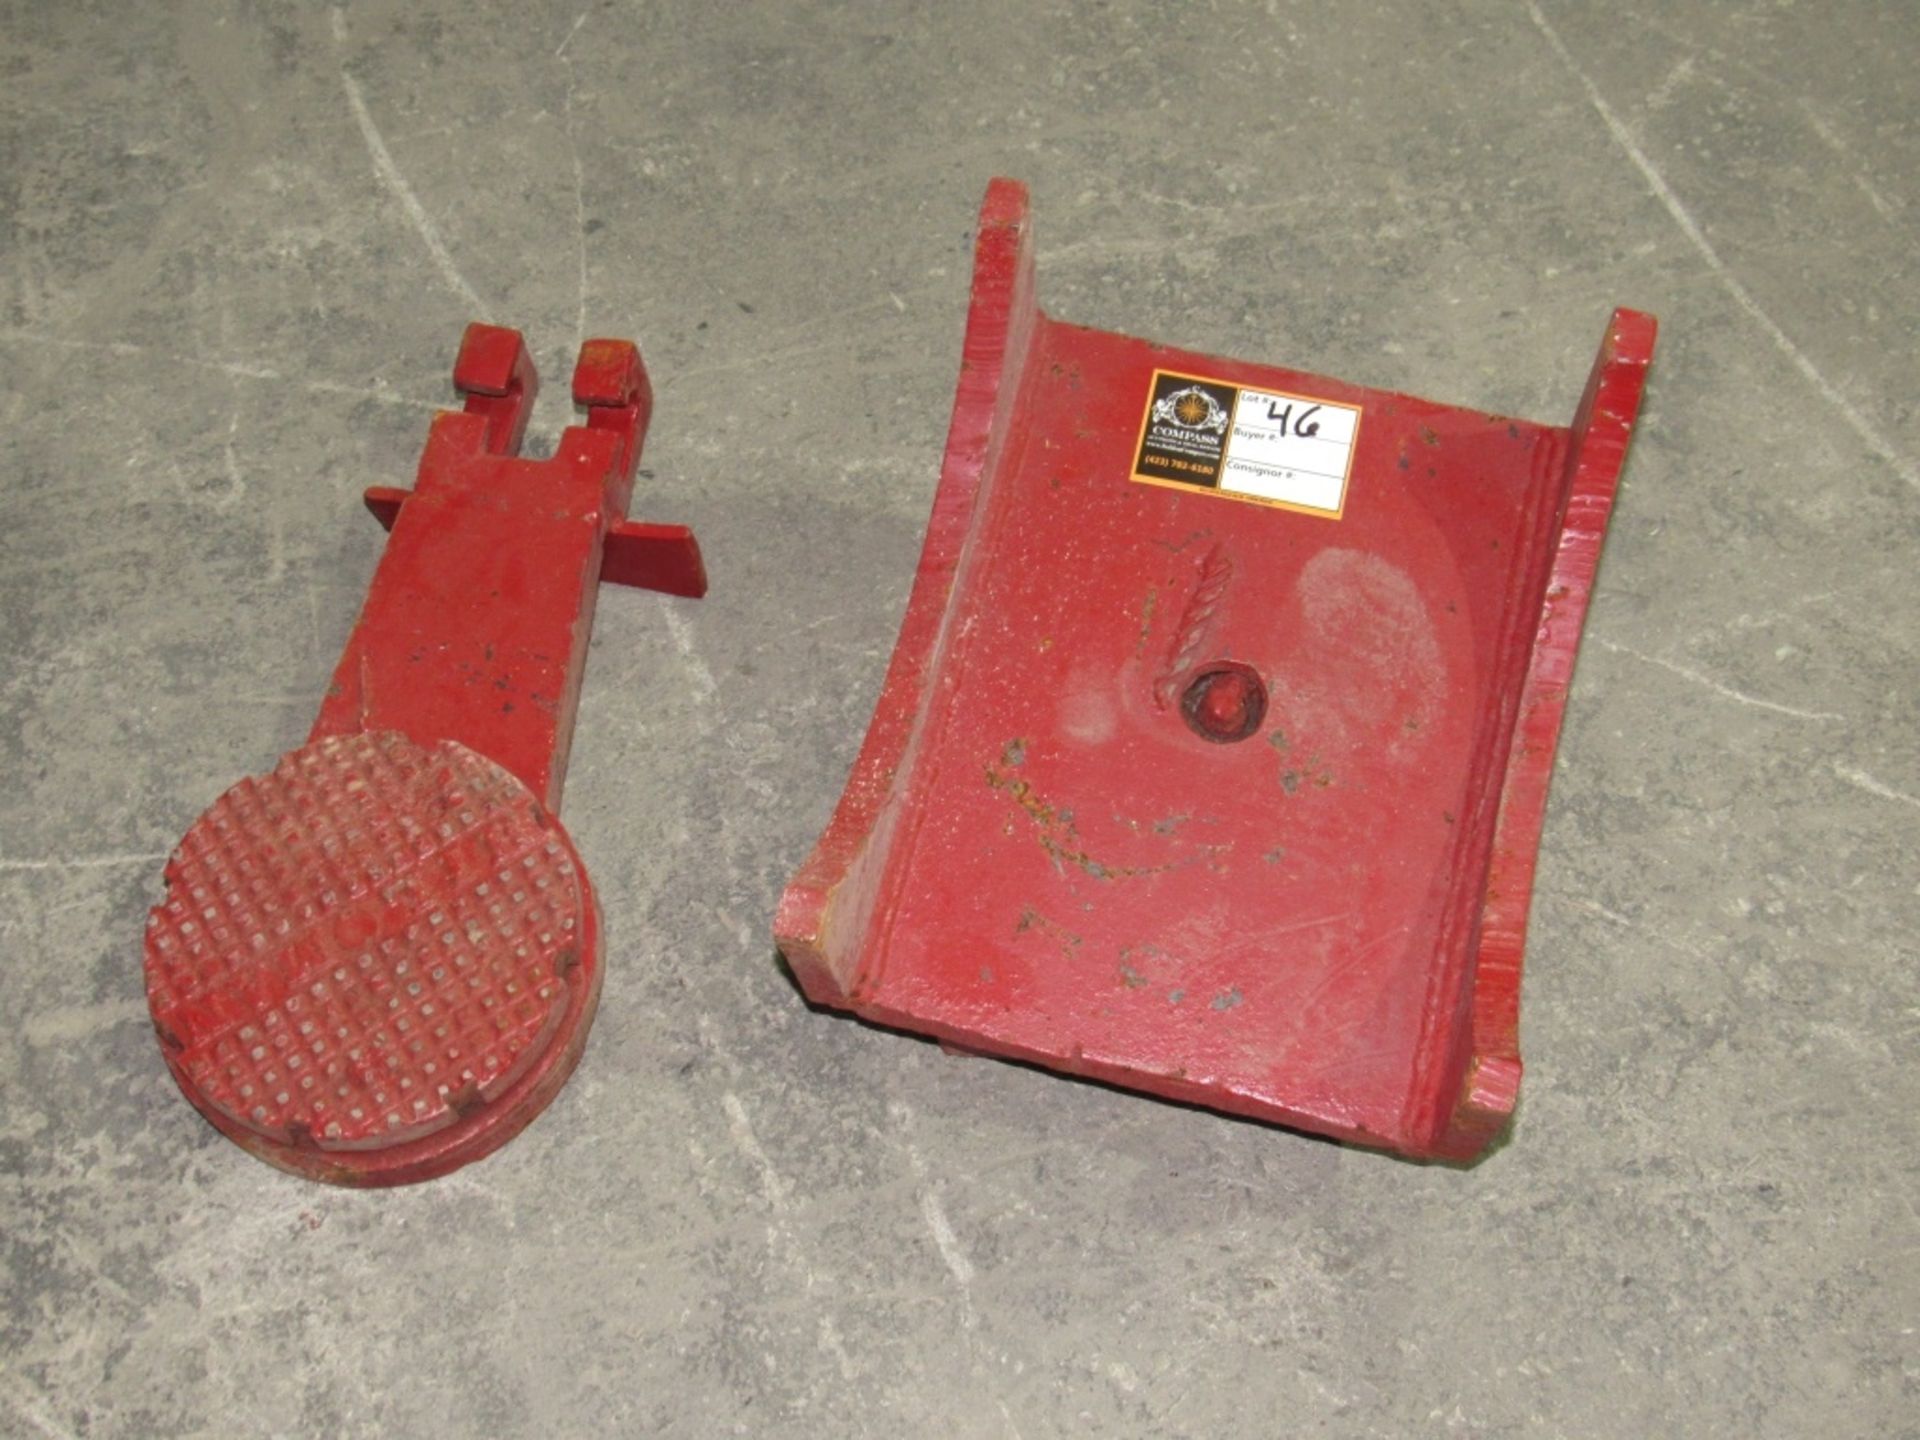 3 Ton Machinery Mover- MFR - Unknown 3 Ton Overall Dimensions - 13" x 9" x 4"